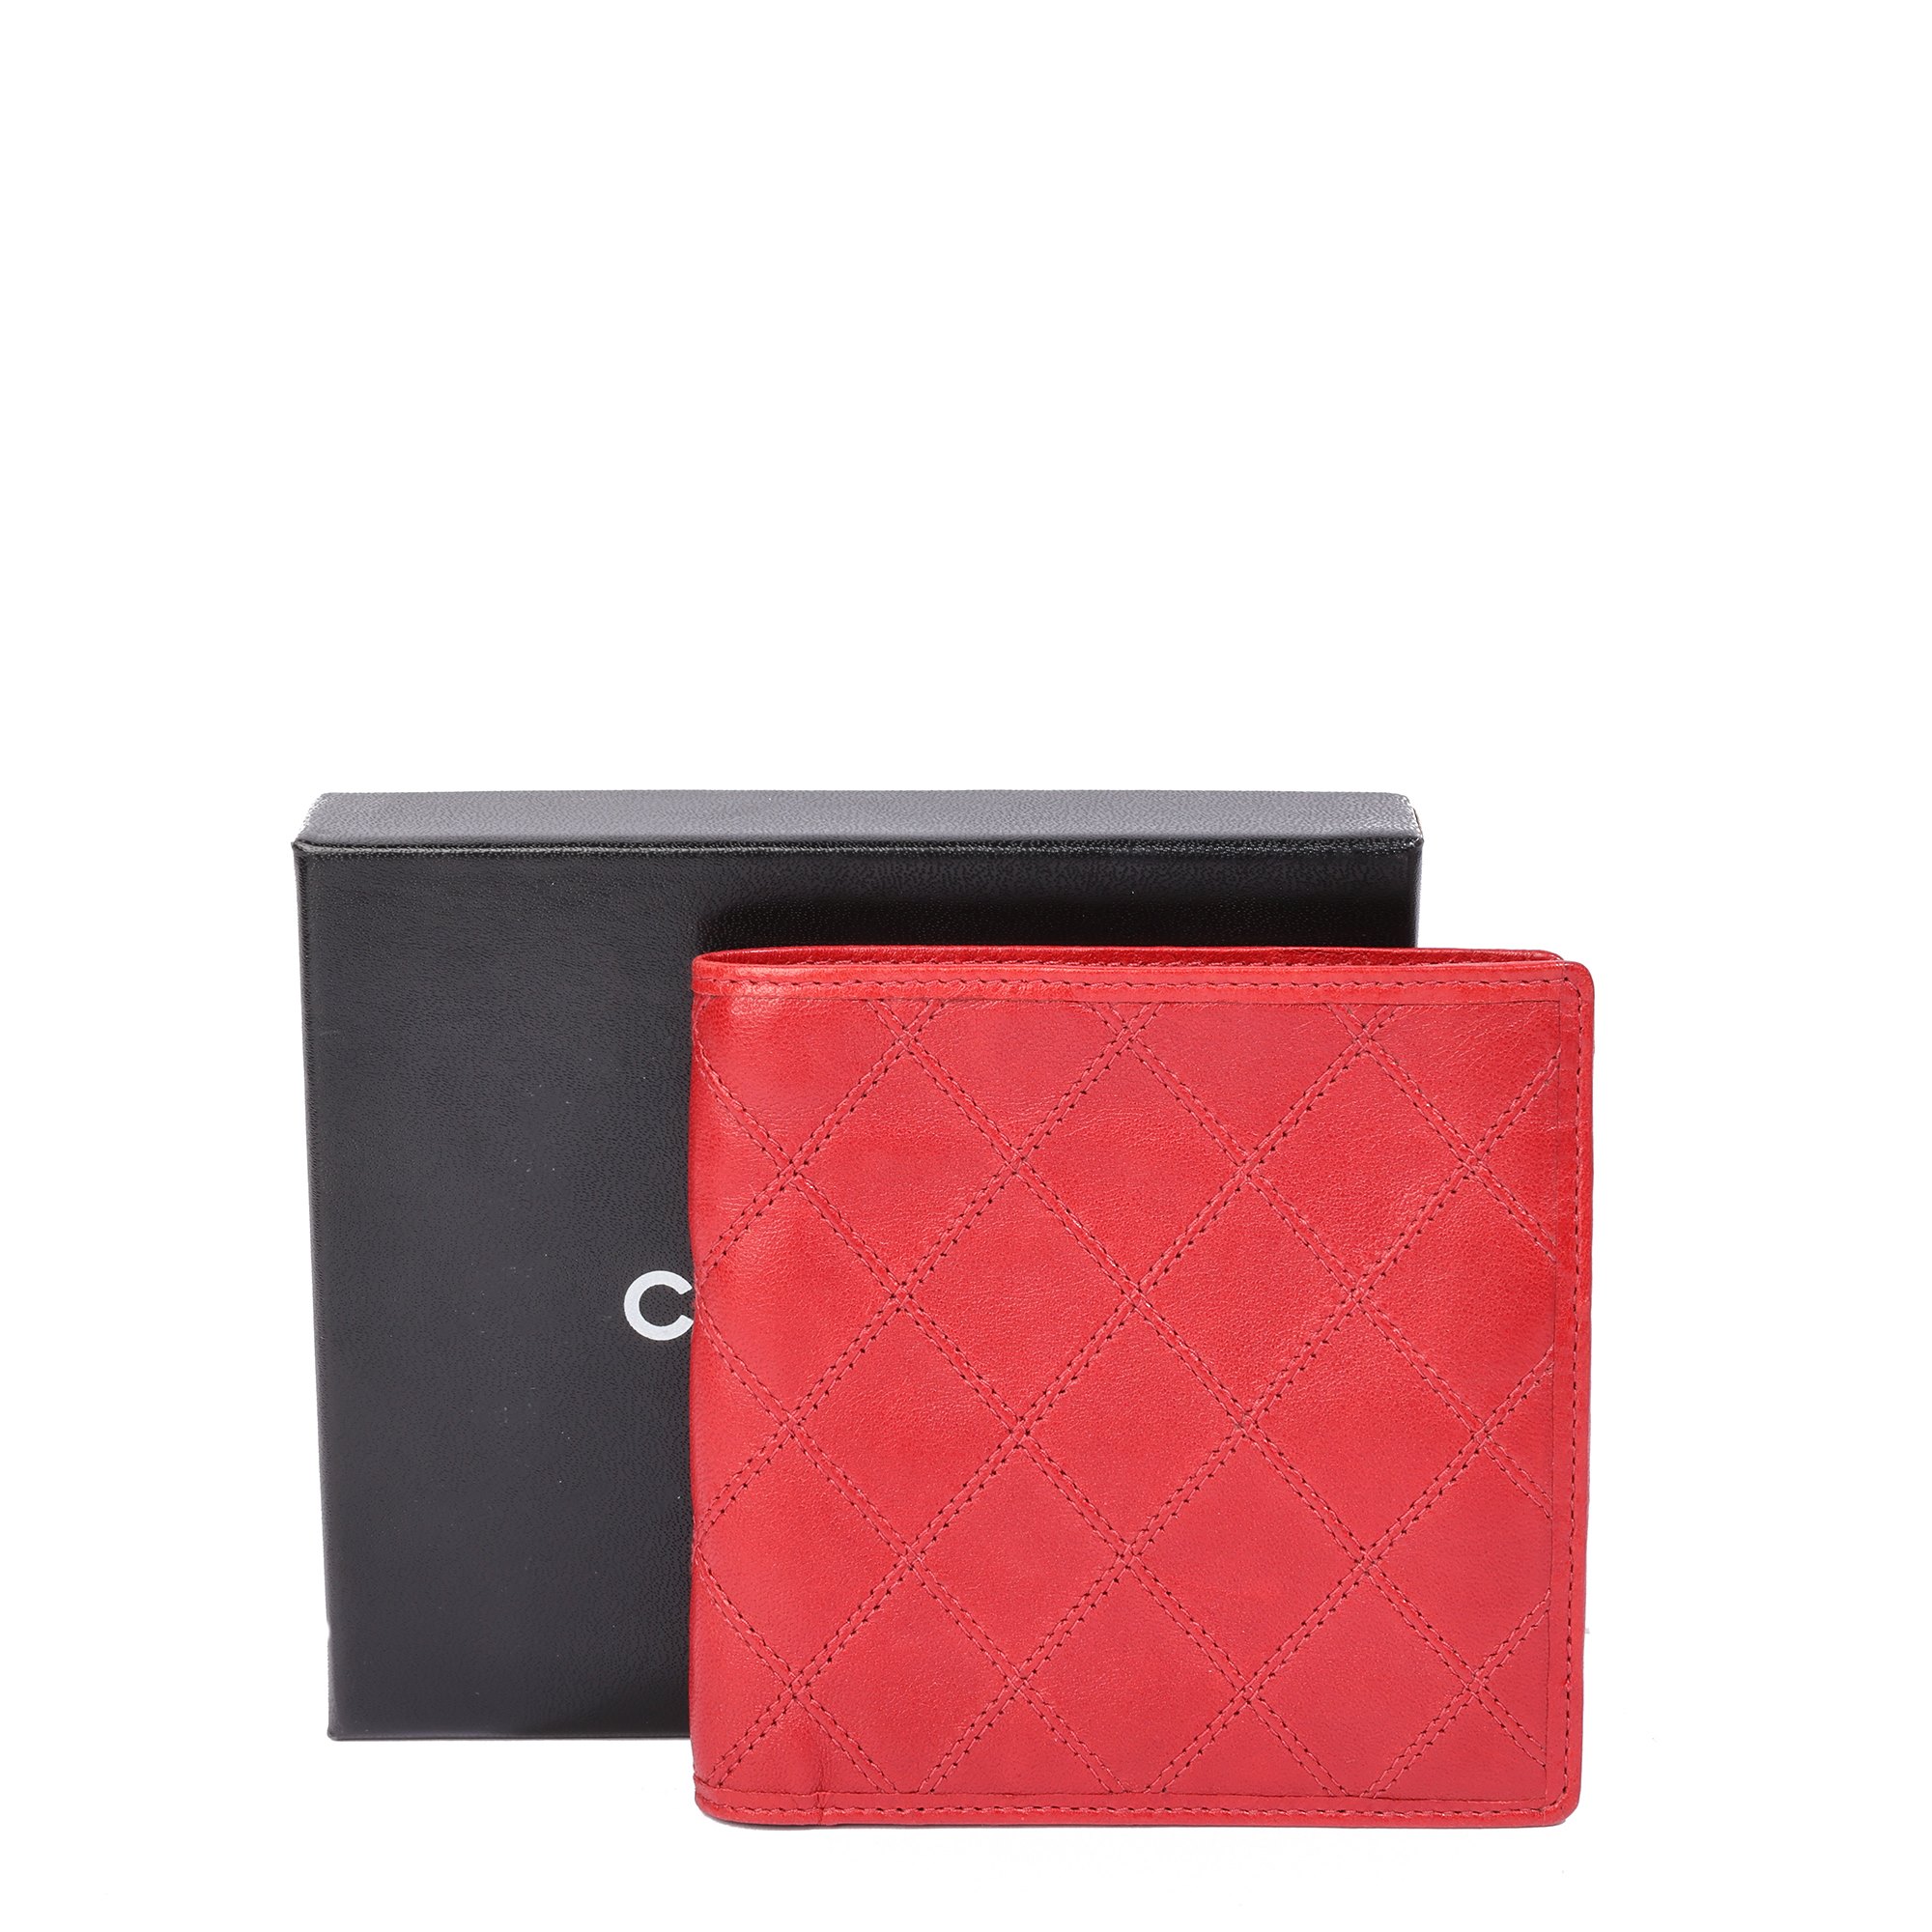 Chanel Red Quilted Lambskin Vintage Bi-Fold Wallet